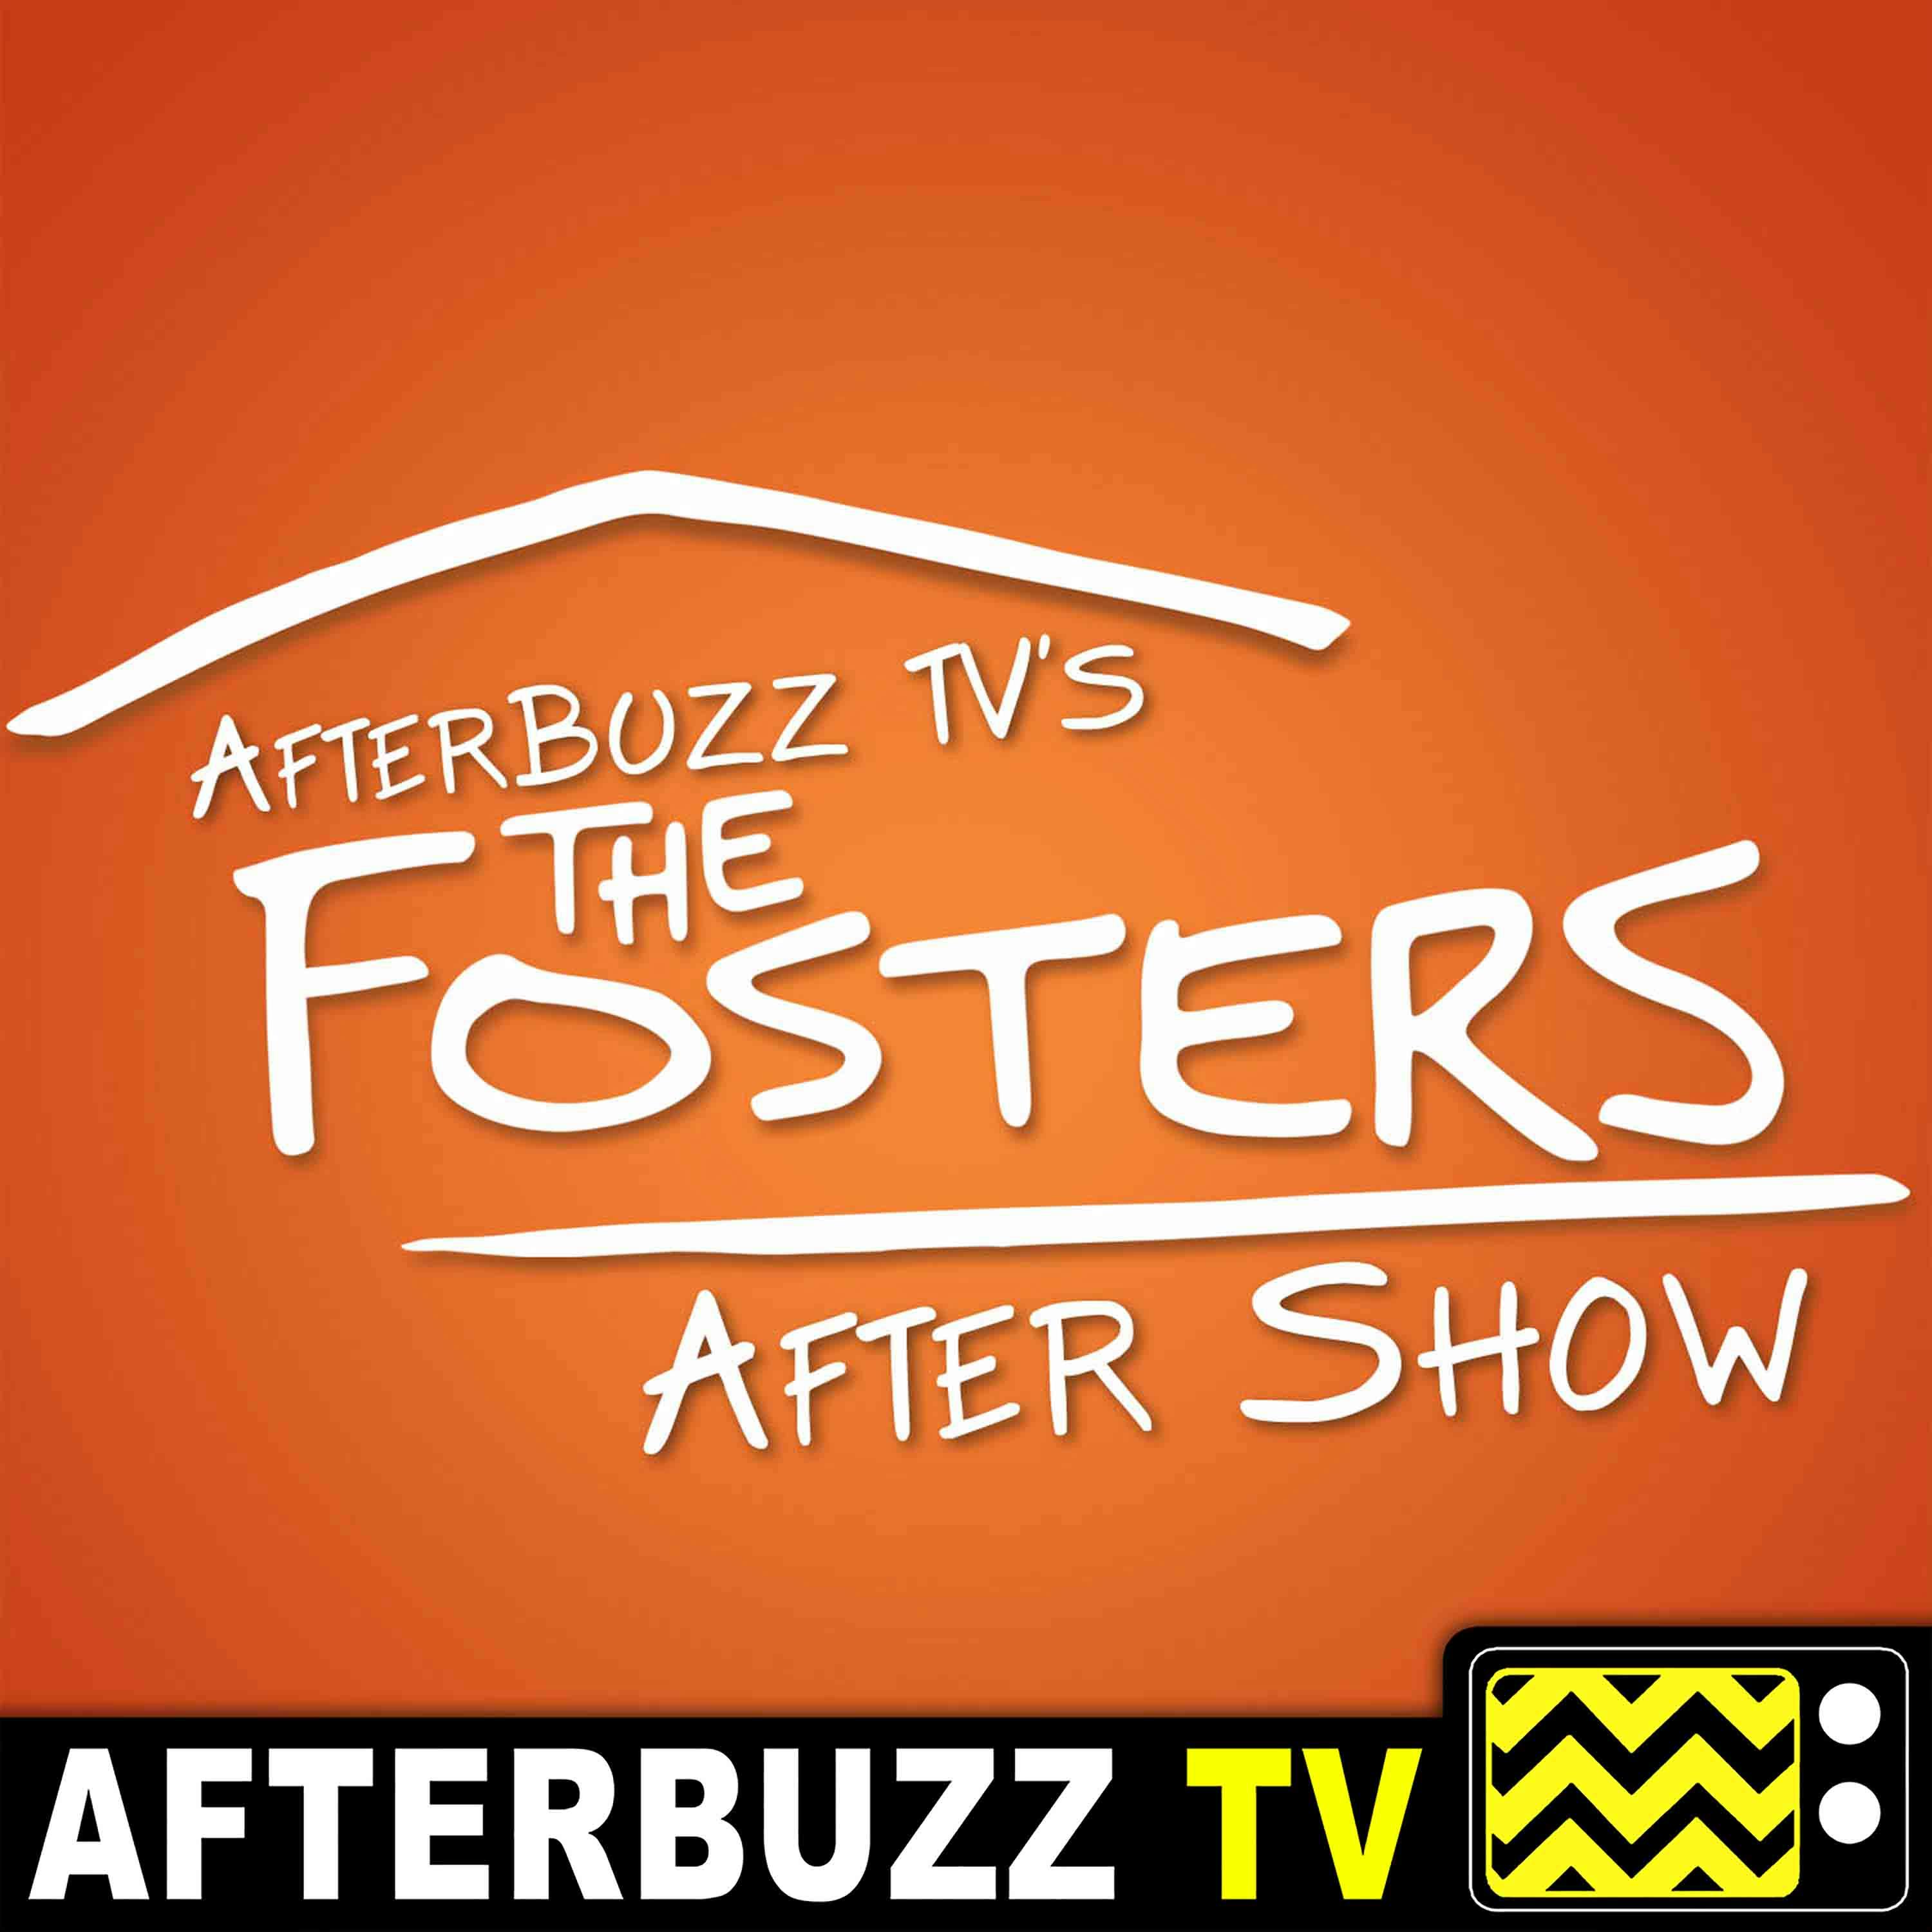 The Fosters S:4 | Louis Hunter Guests On Safe E:2 | AfterBuzz TV AfterShow